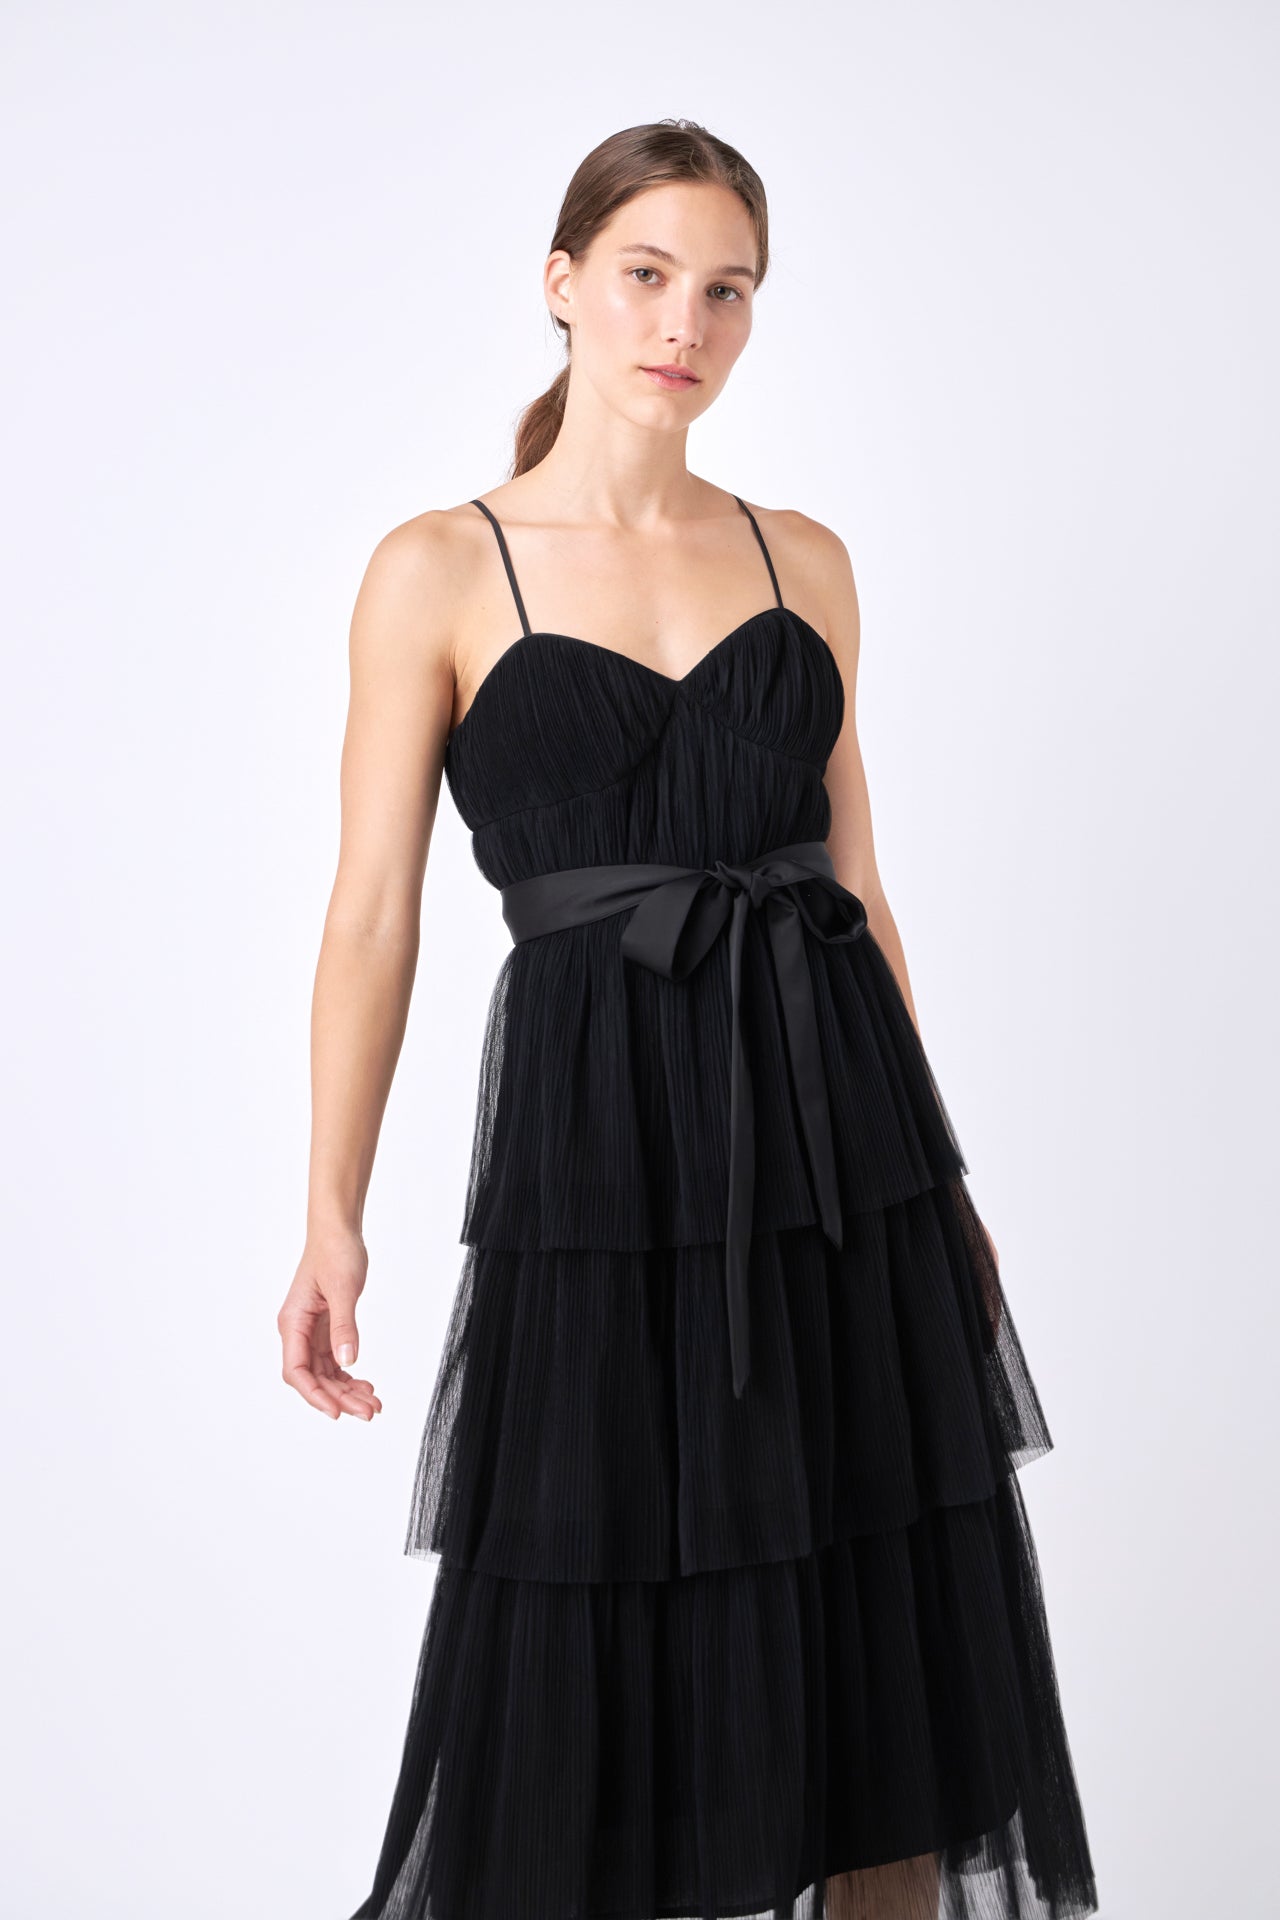 ENDLESS ROSE - Tulle Tiered Midi Dress - DRESSES available at Objectrare